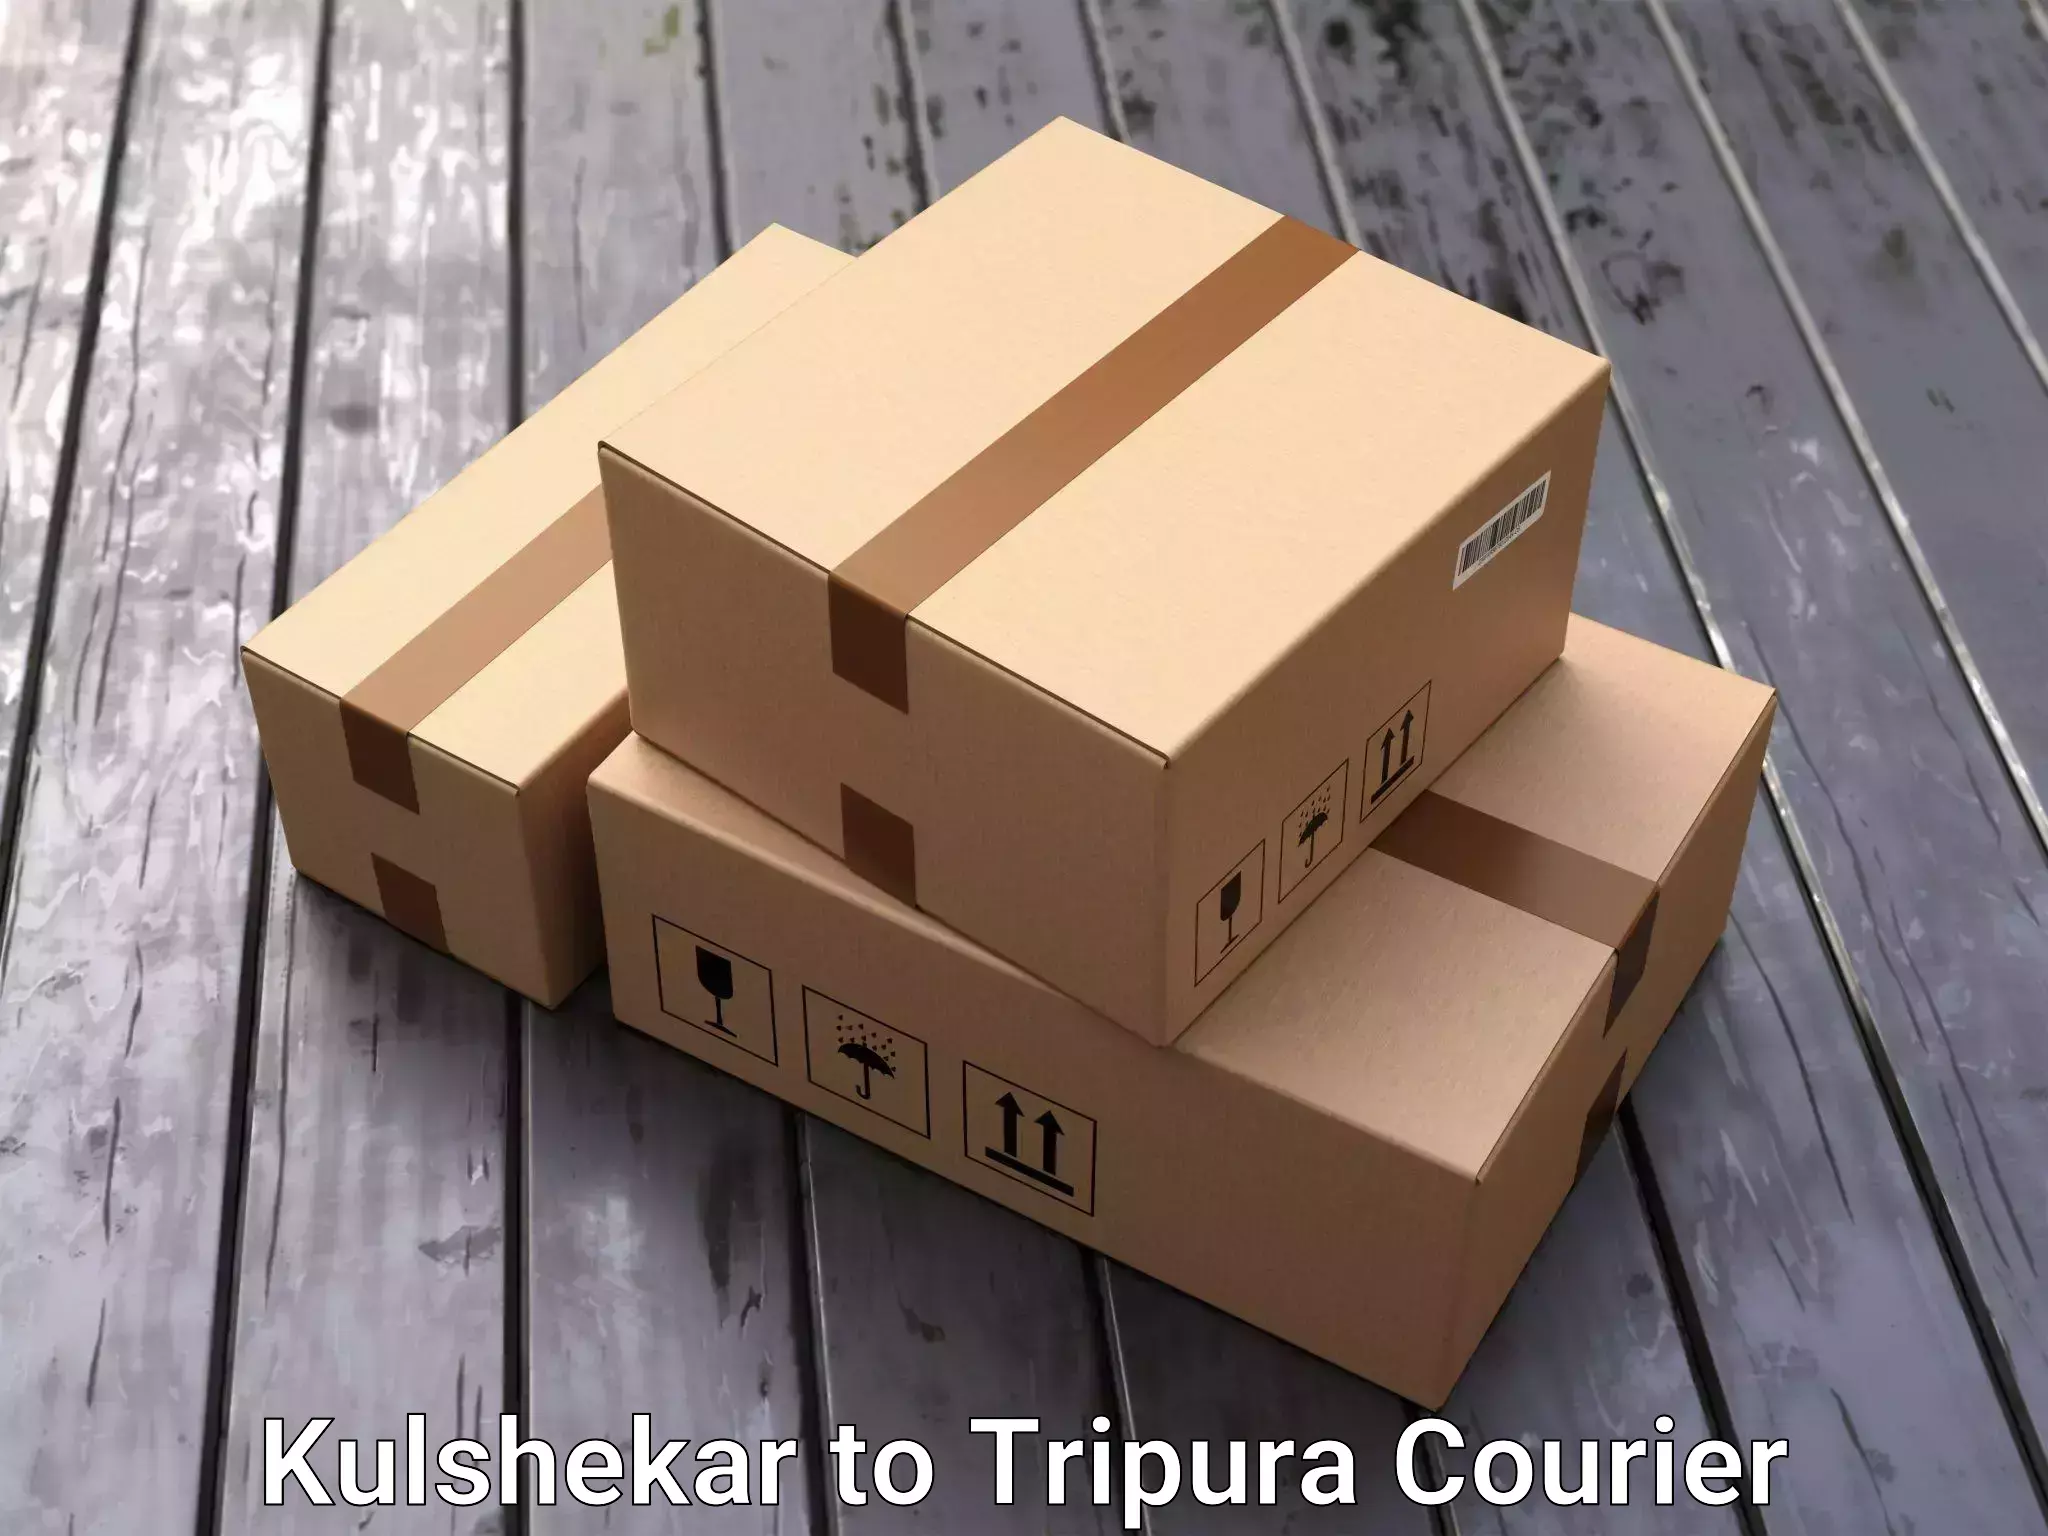 Cost-effective moving solutions Kulshekar to Udaipur Tripura